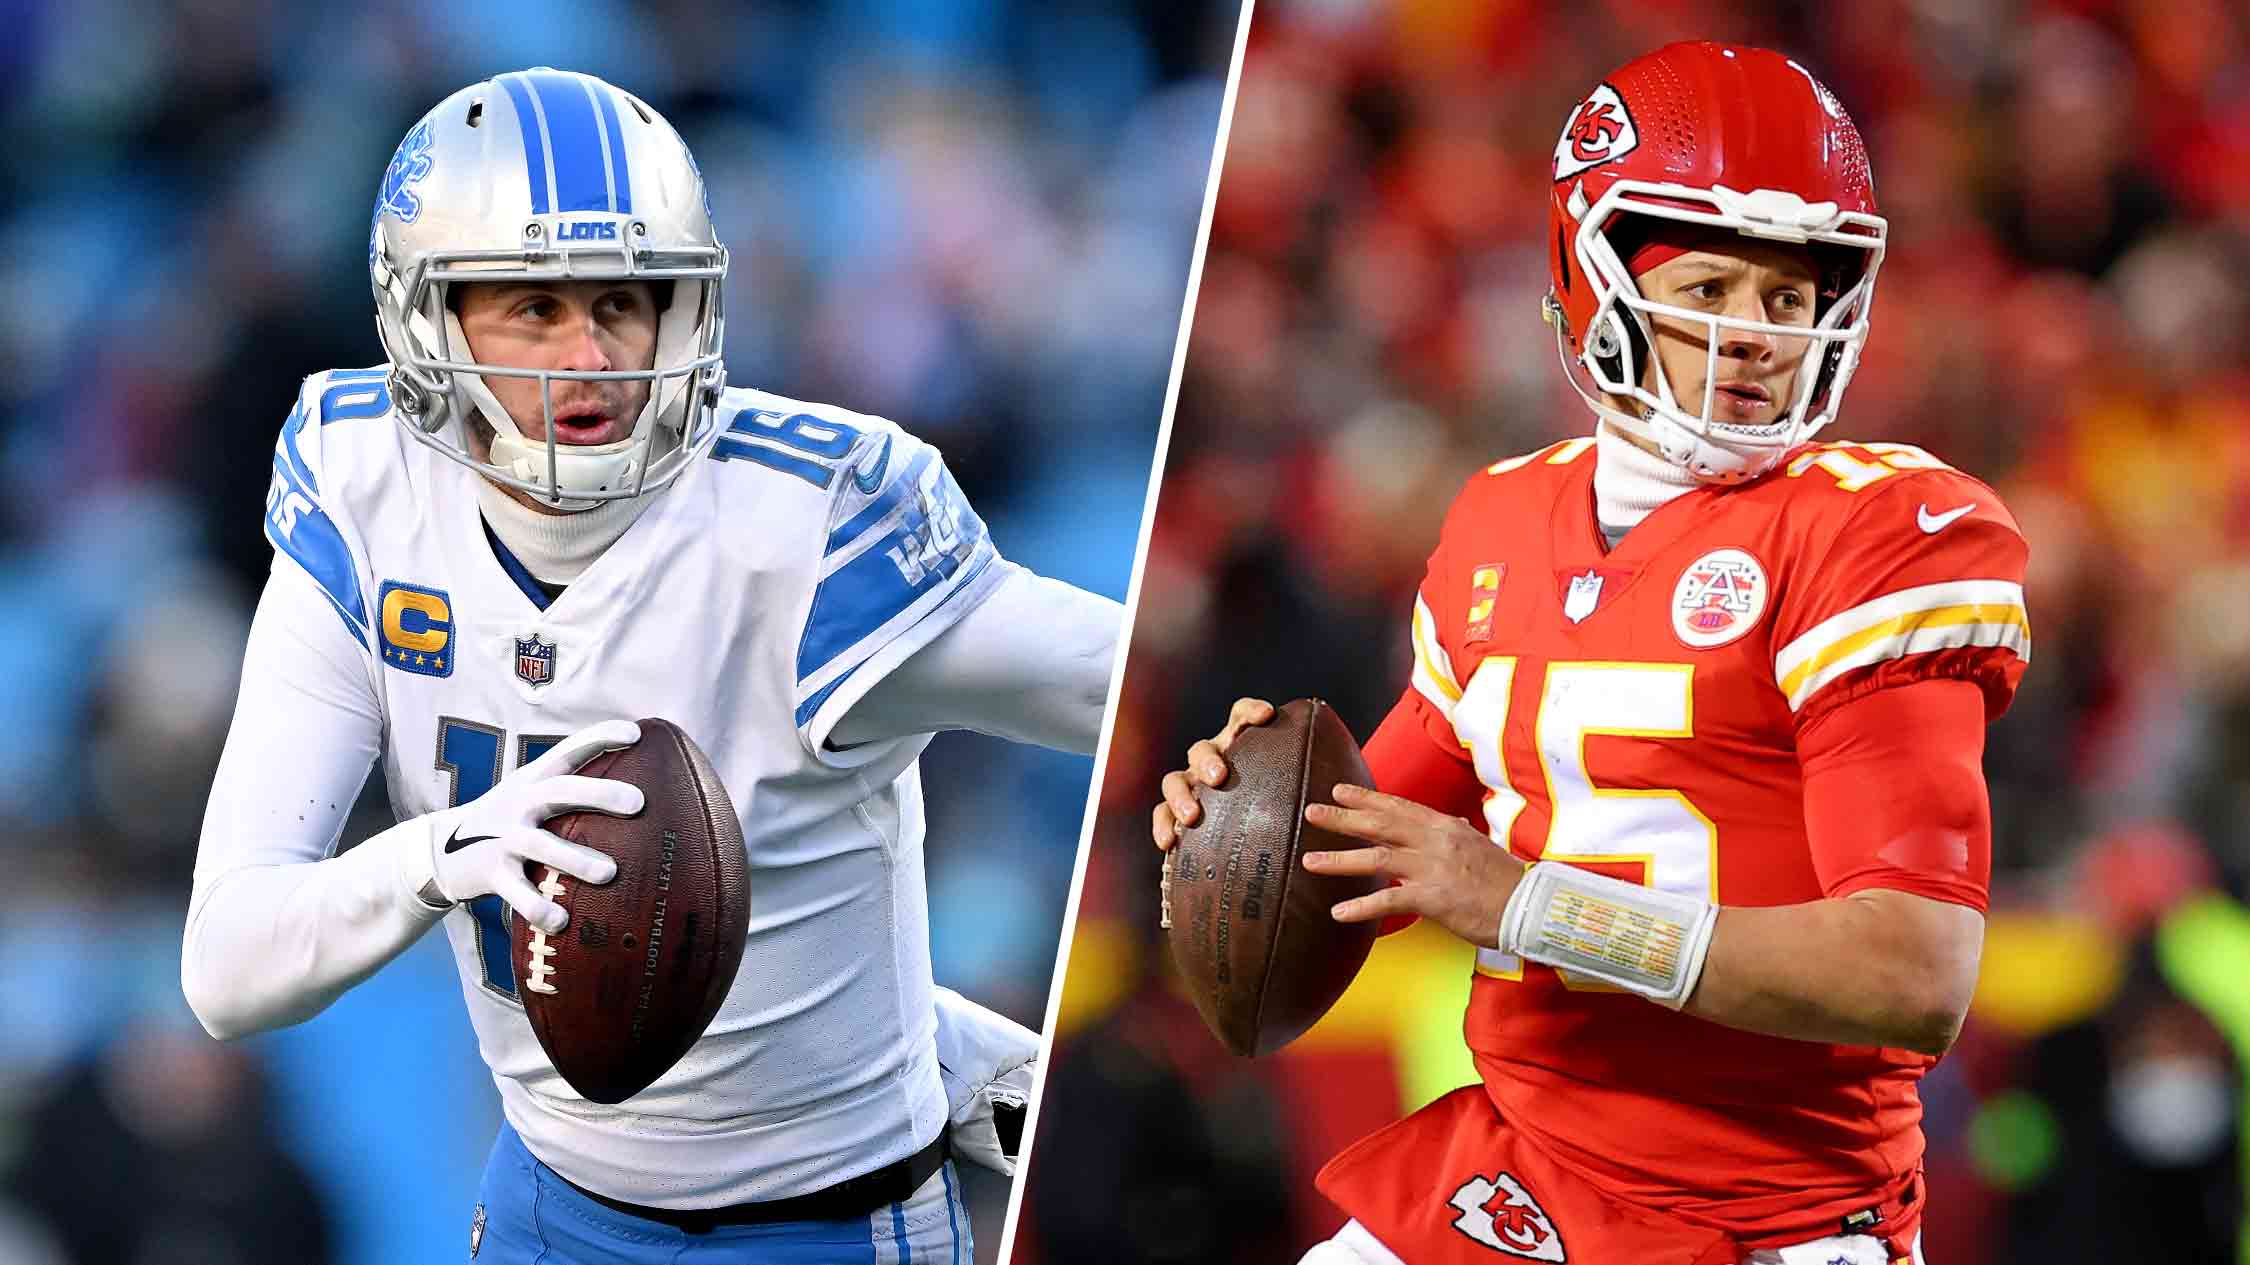 Lions vs. Chiefs live stream: How to watch NFL Kickoff Game on TV, online –  NBC Los Angeles